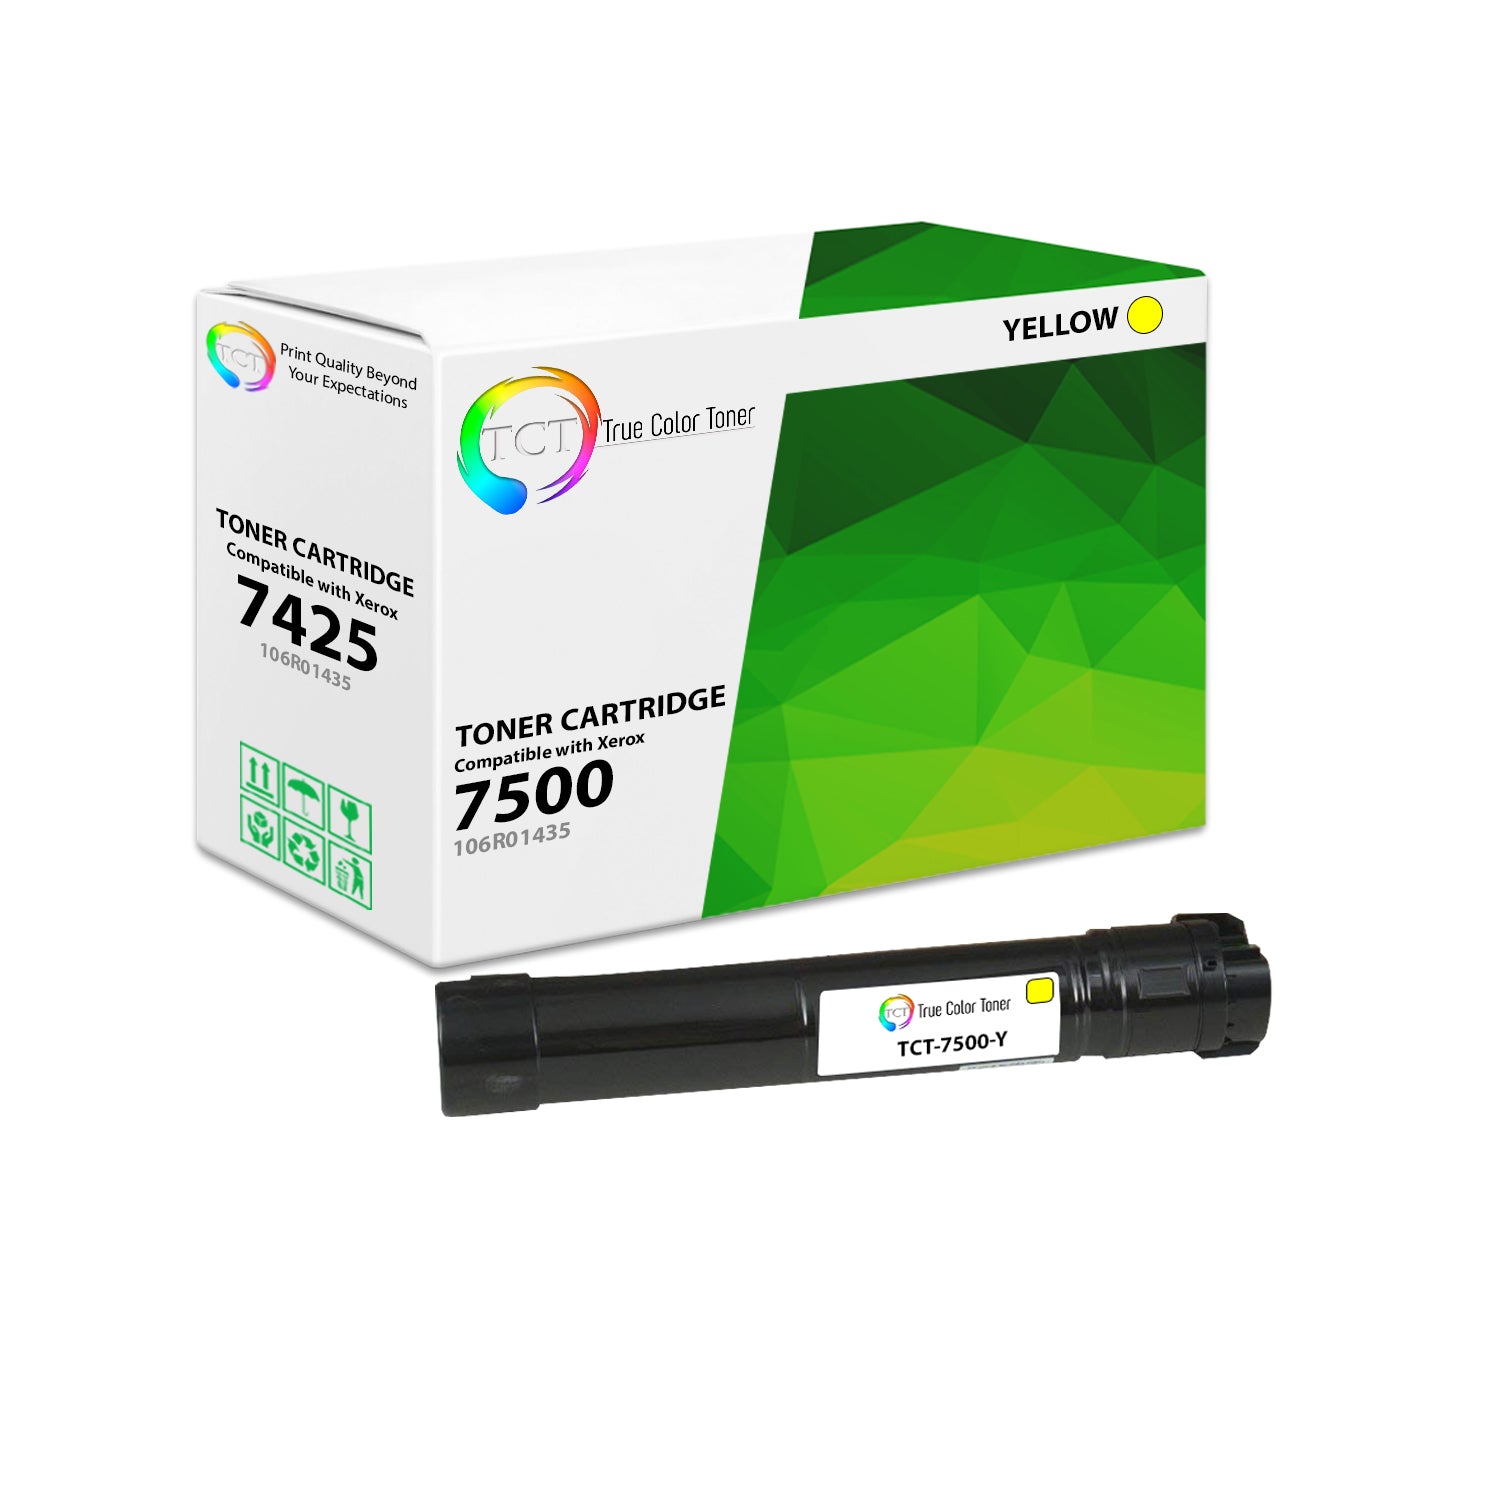 TCT Compatible Toner Cartridge Replacement for the Xerox 7500 Series - 1 Pack Yellow